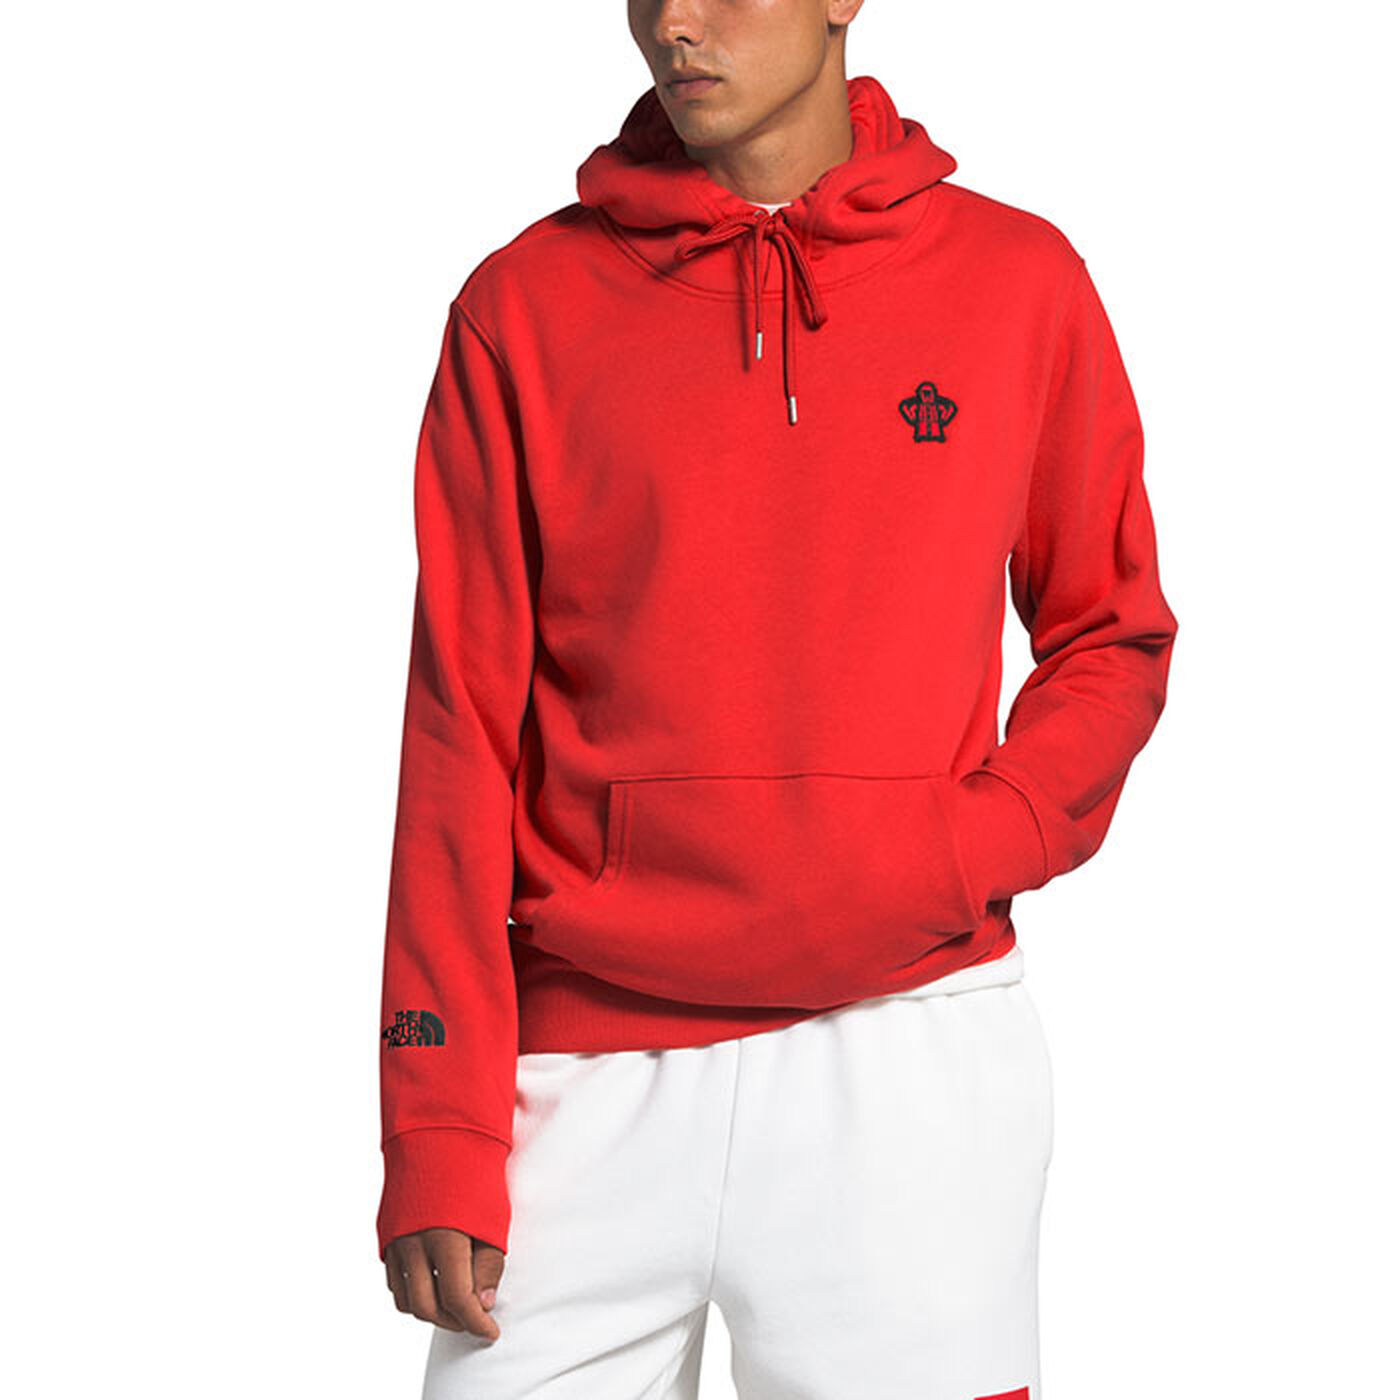 THE NORTH FACE – Men's Mini Culture Pullover Hoodie | Misscounts